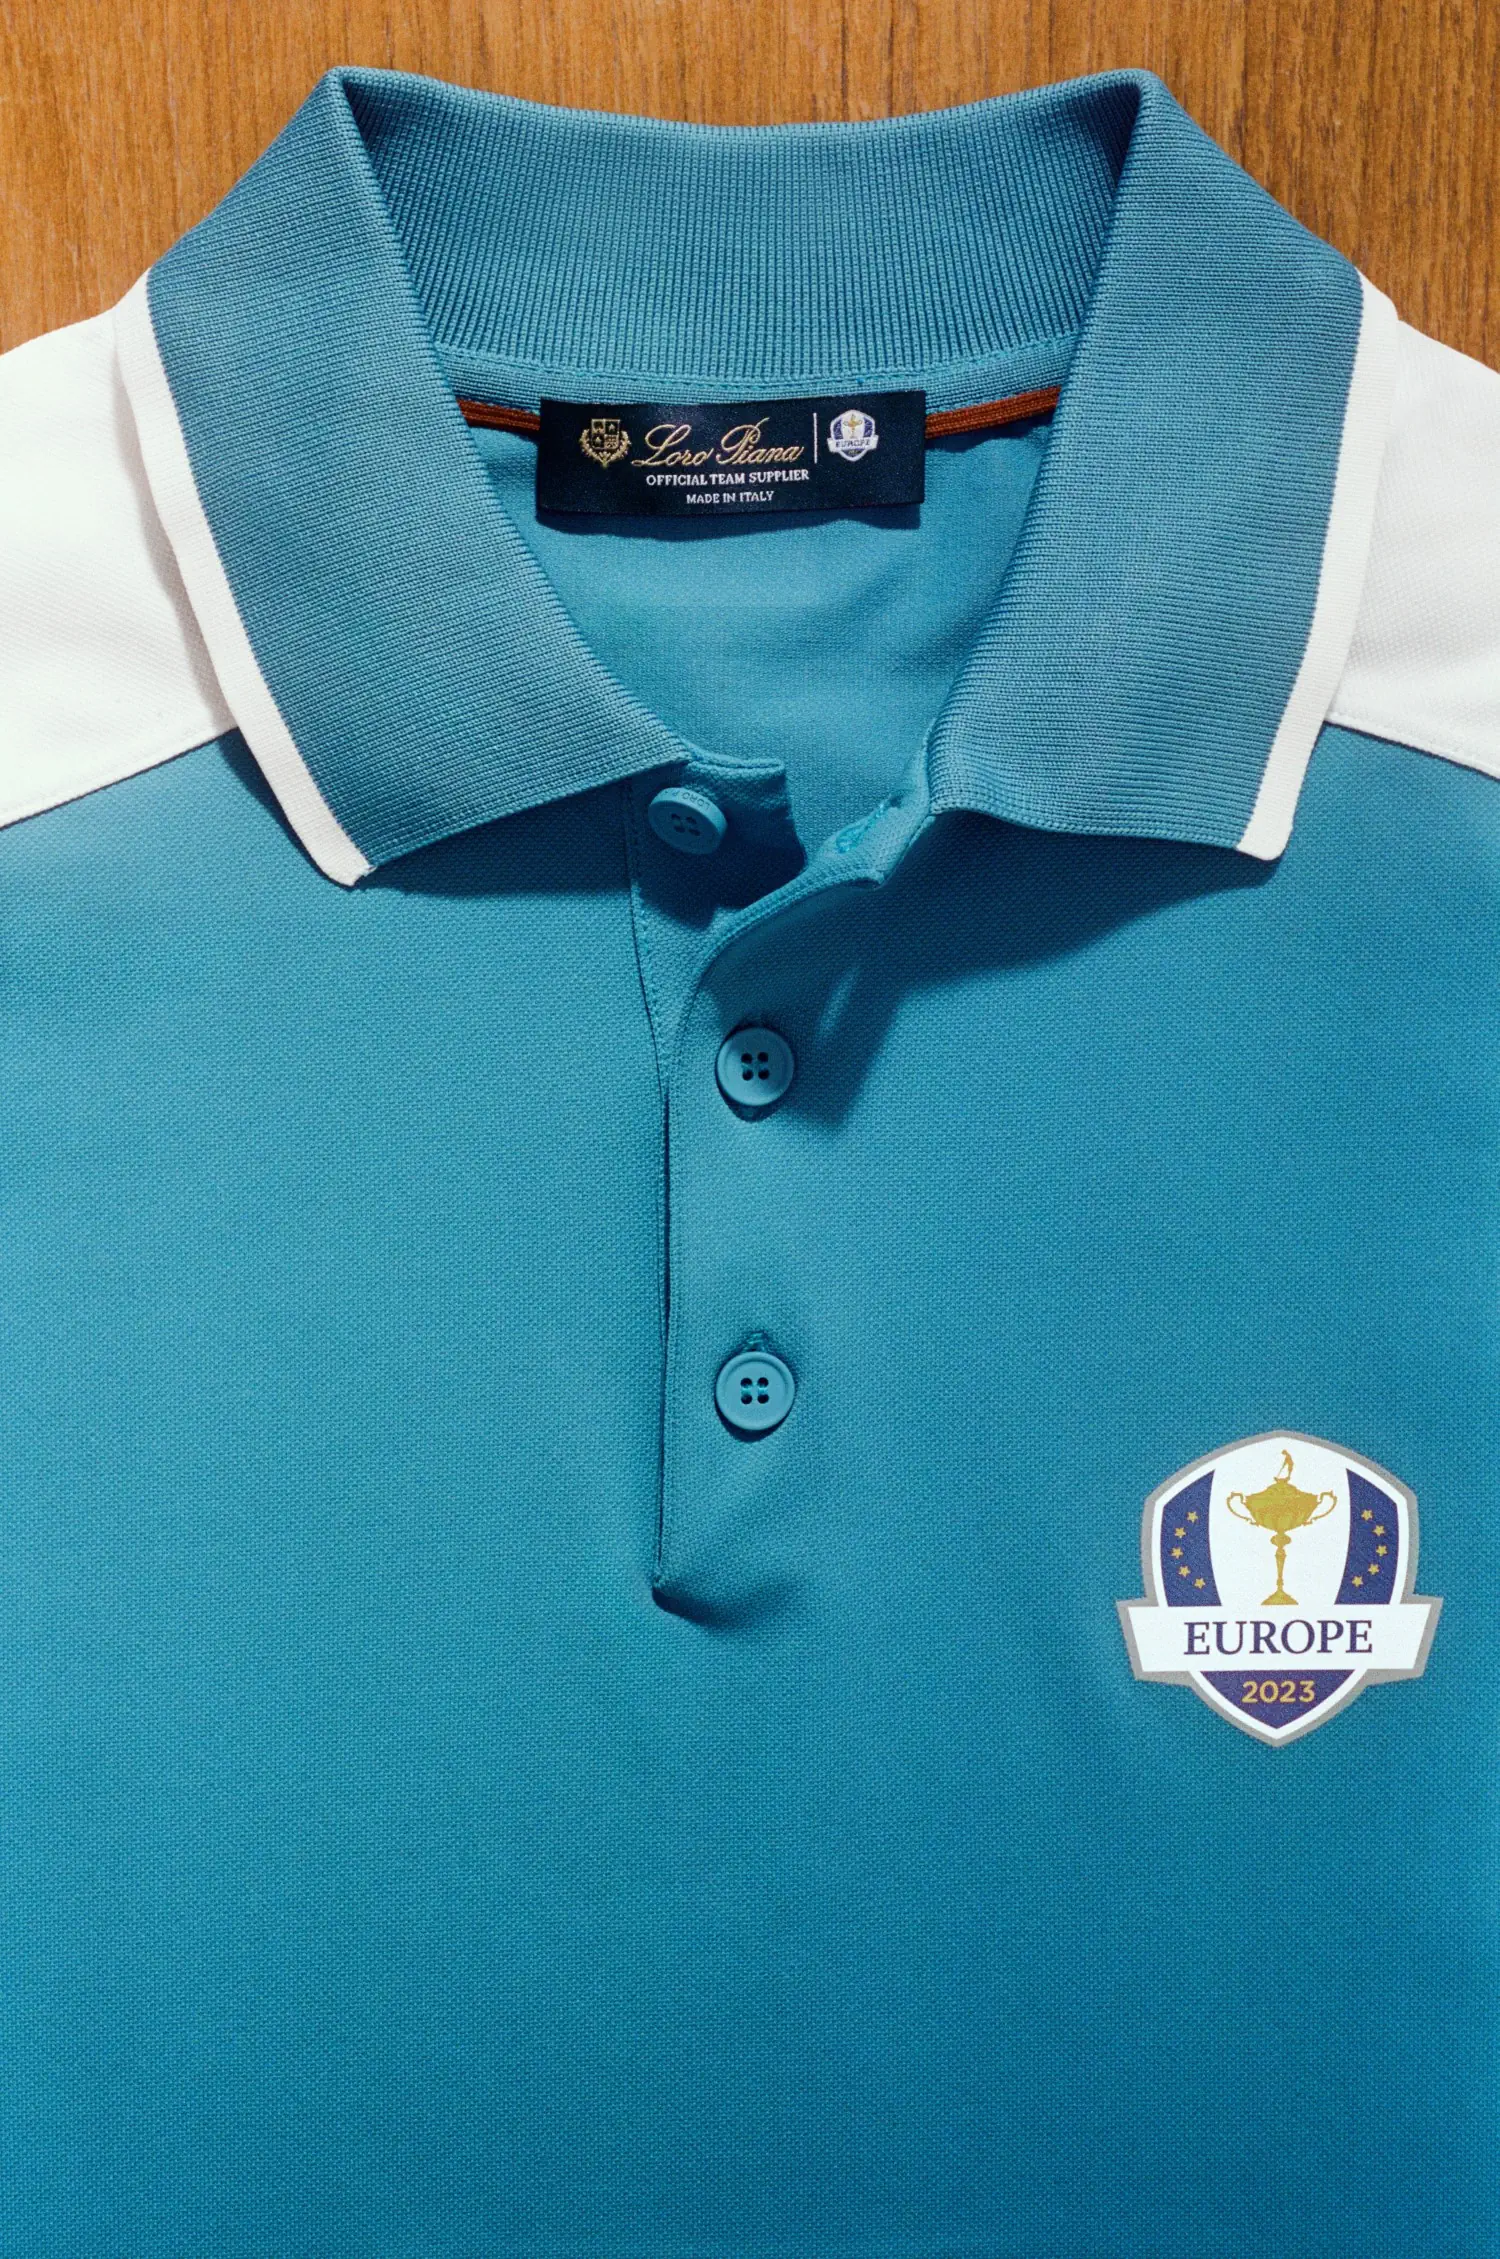 Loro Piana Outfits The Team Europe For 2023 Ryder Cup